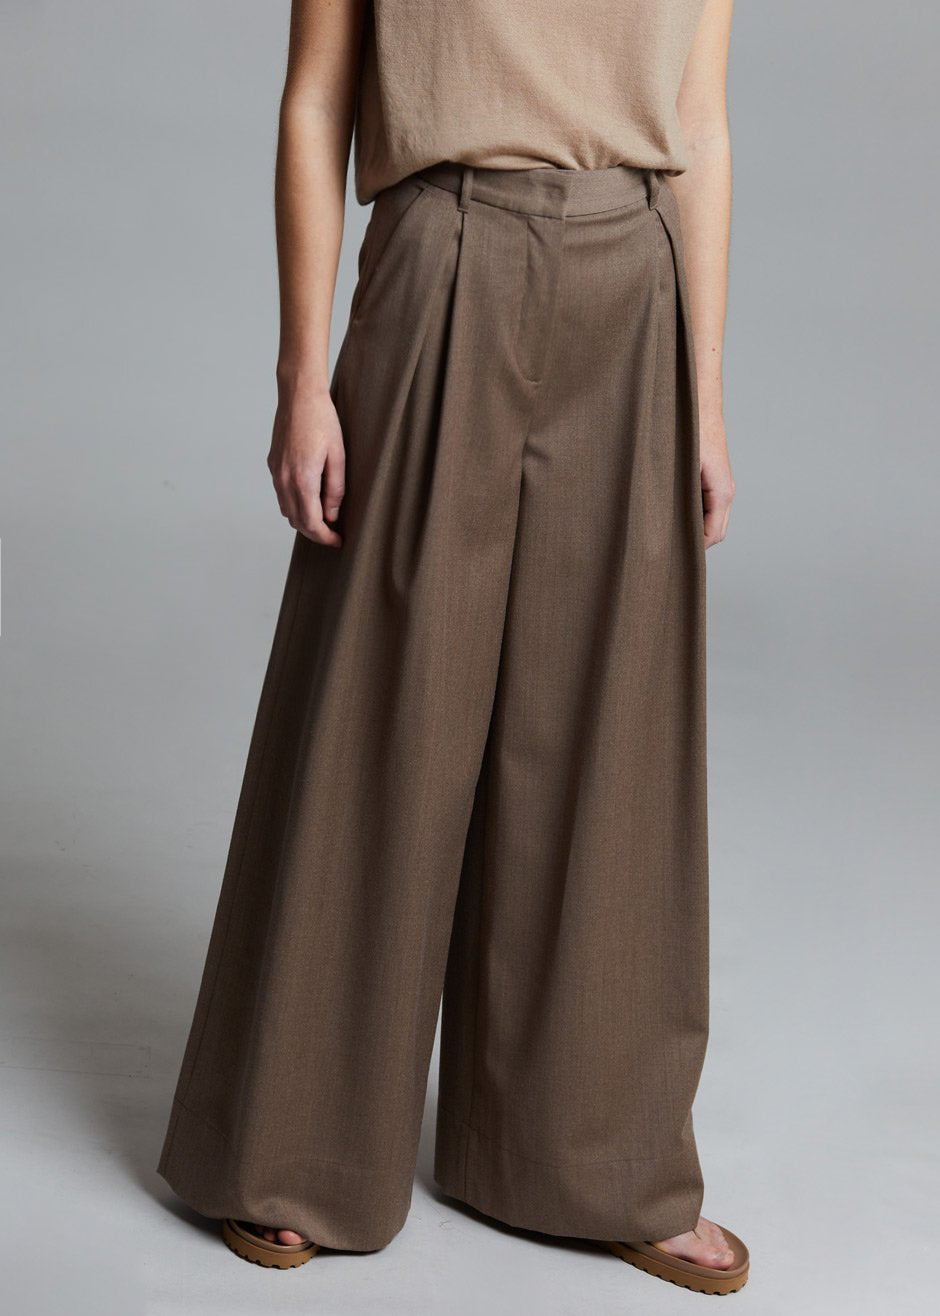 Equus Pants by The Garment in Taupe - 2